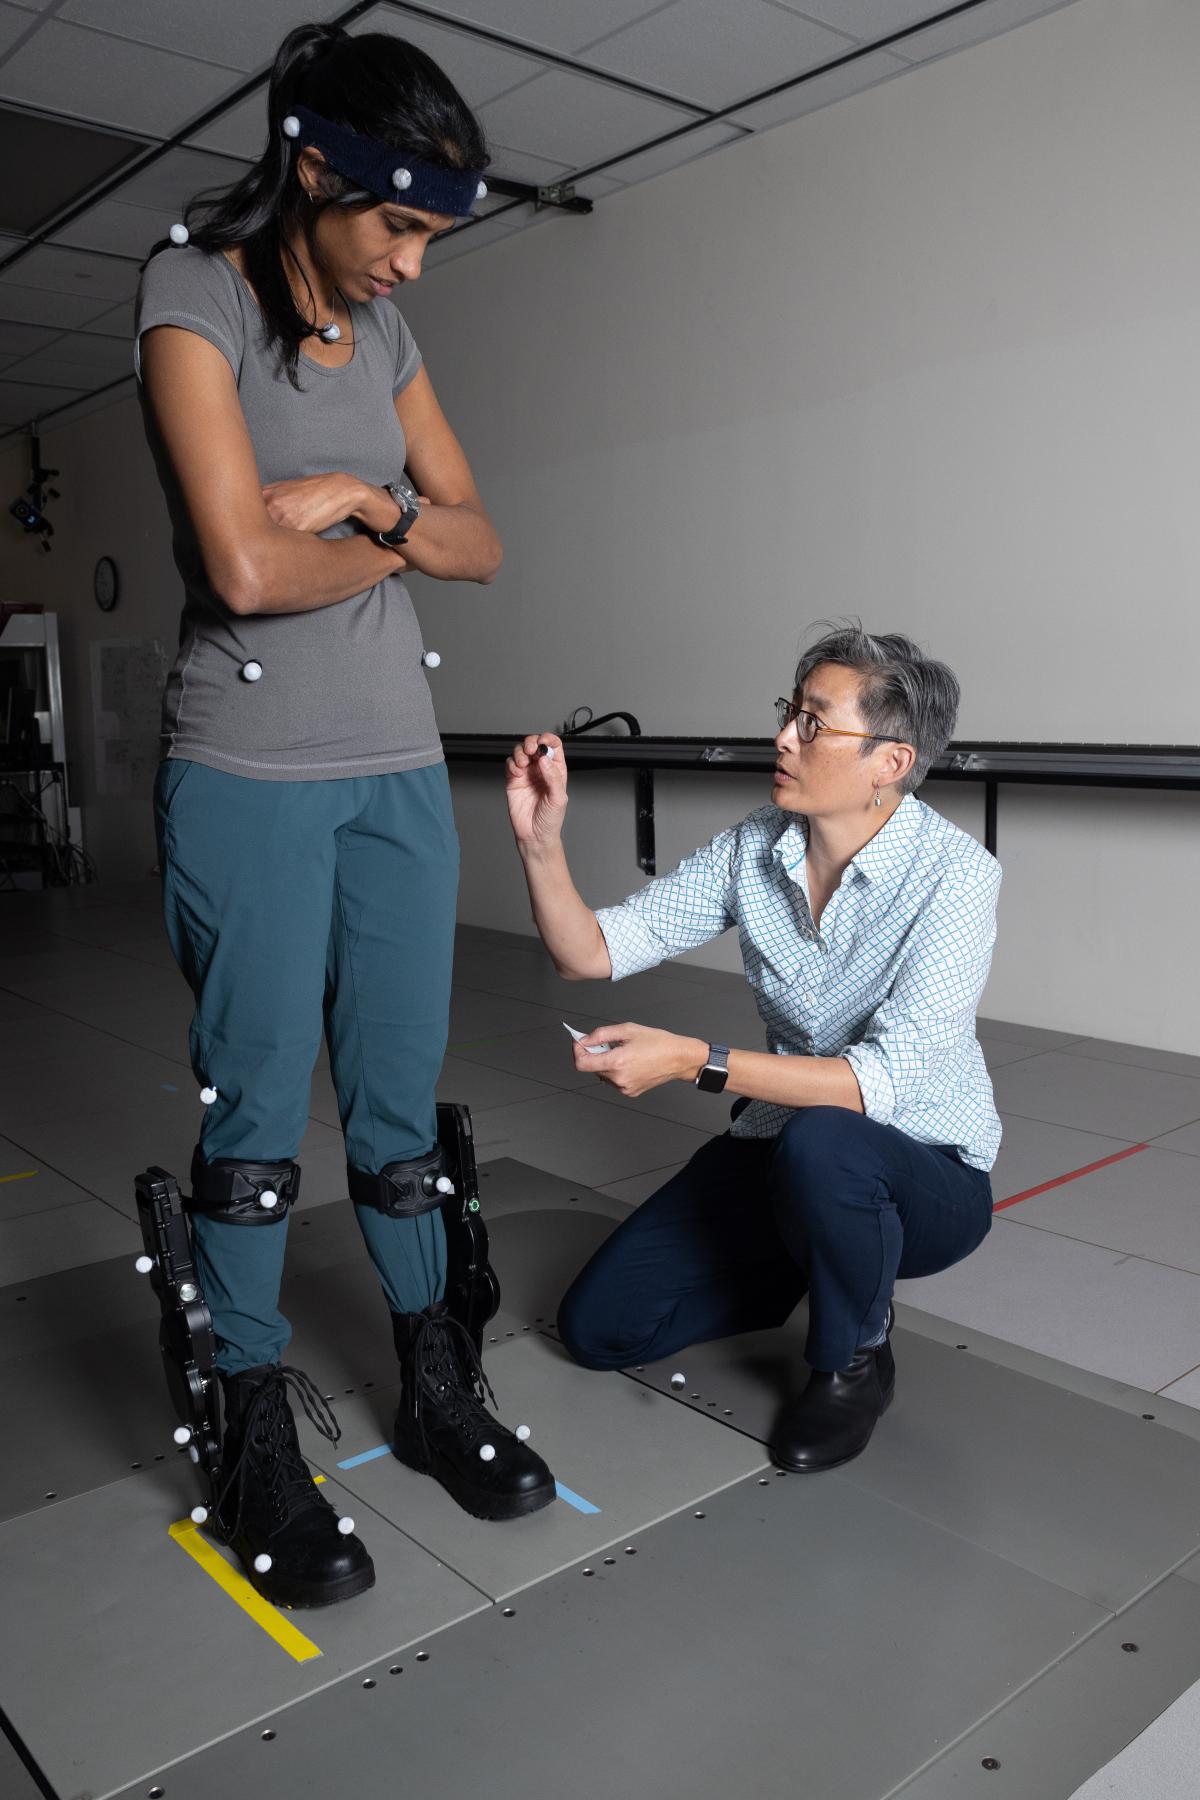 Lena Teng applies sensors to a person standing on a moveable floor platform